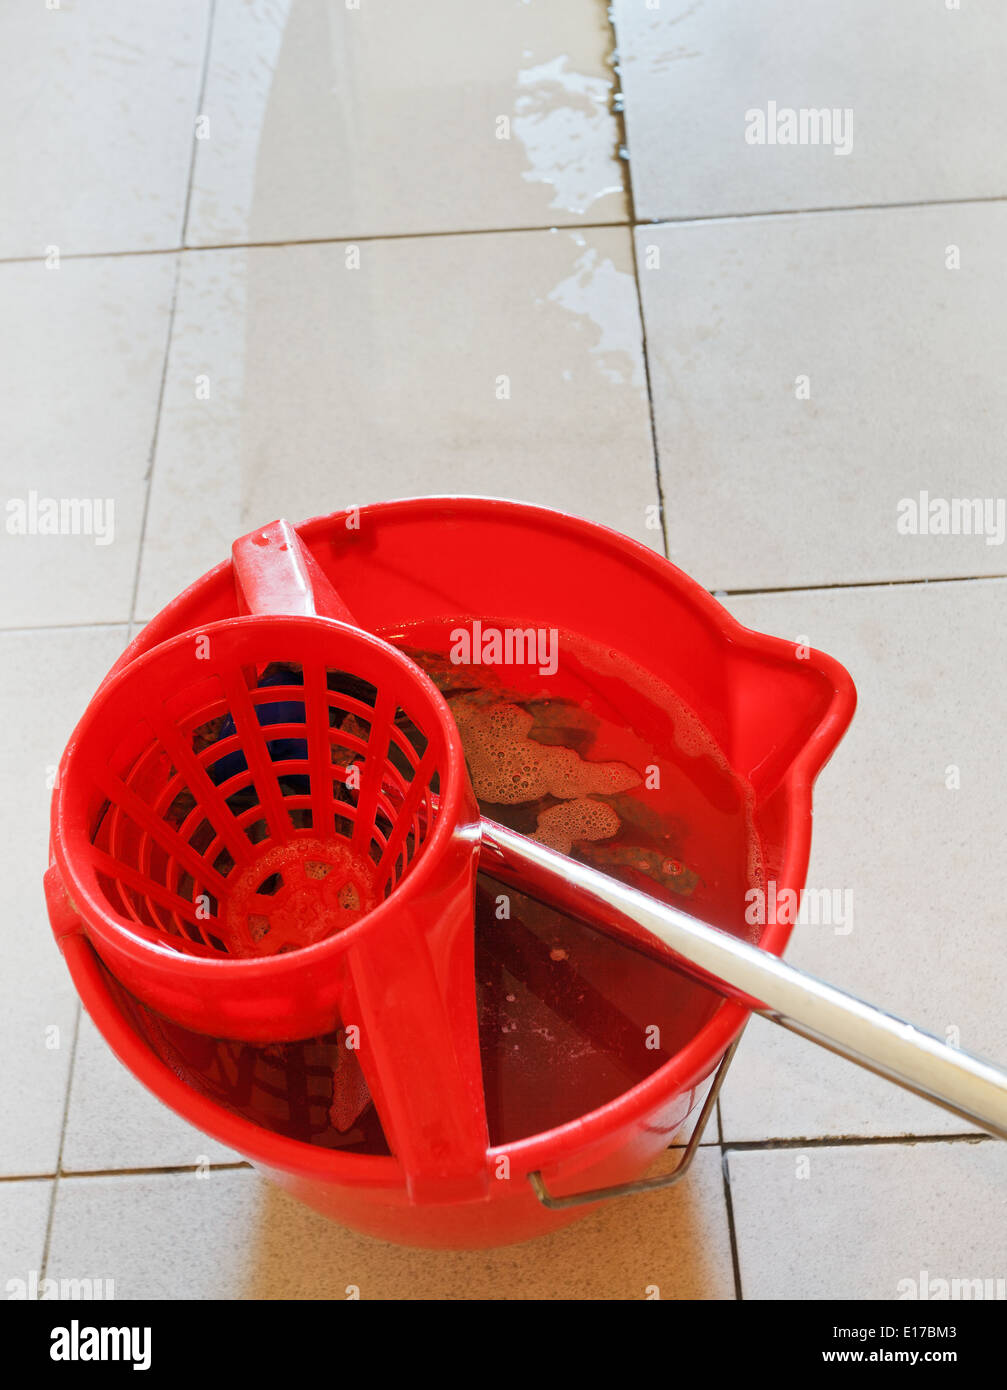 https://c8.alamy.com/comp/E17BM3/swab-in-red-bucket-with-washing-water-and-cleaning-tile-floor-E17BM3.jpg